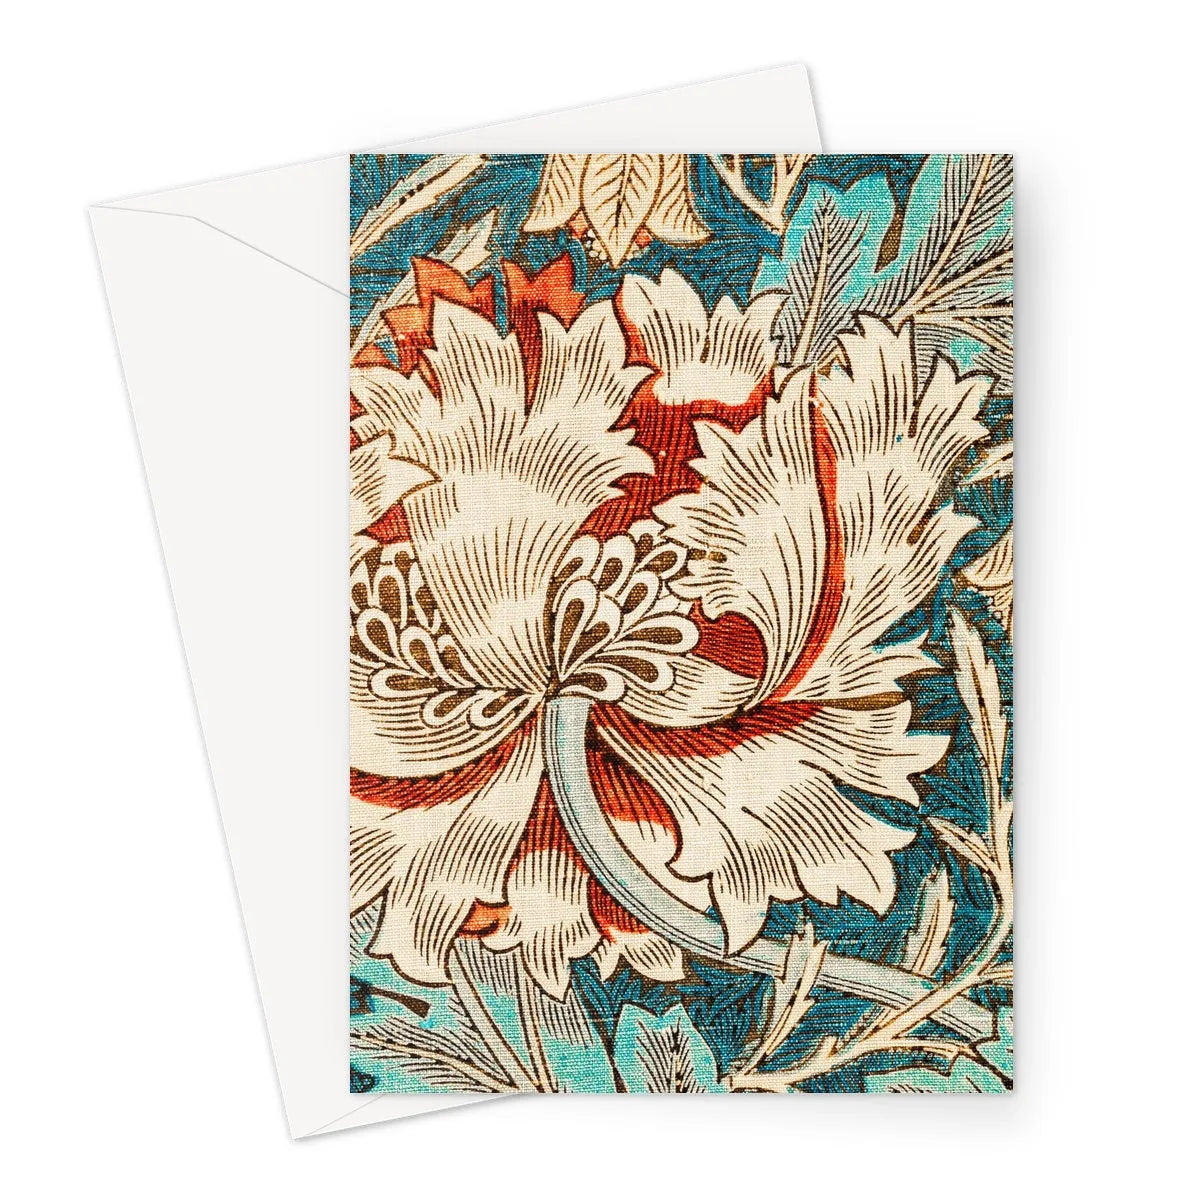 Honeysuckle Too By William Morris Greeting Card - A5 Portrait / 1 Card - Greeting & Note Cards - Aesthetic Art